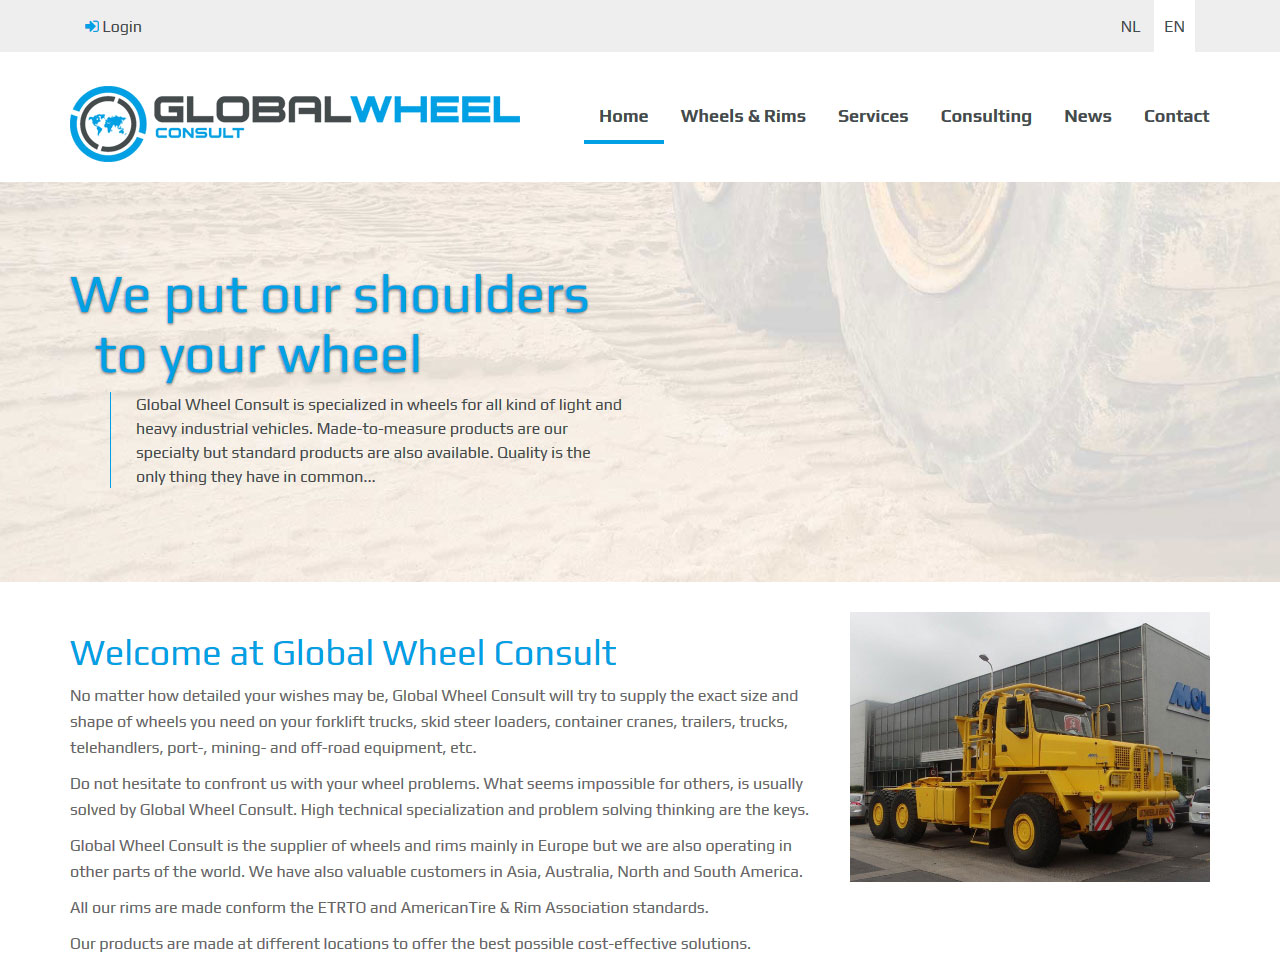 Global Wheel Consult